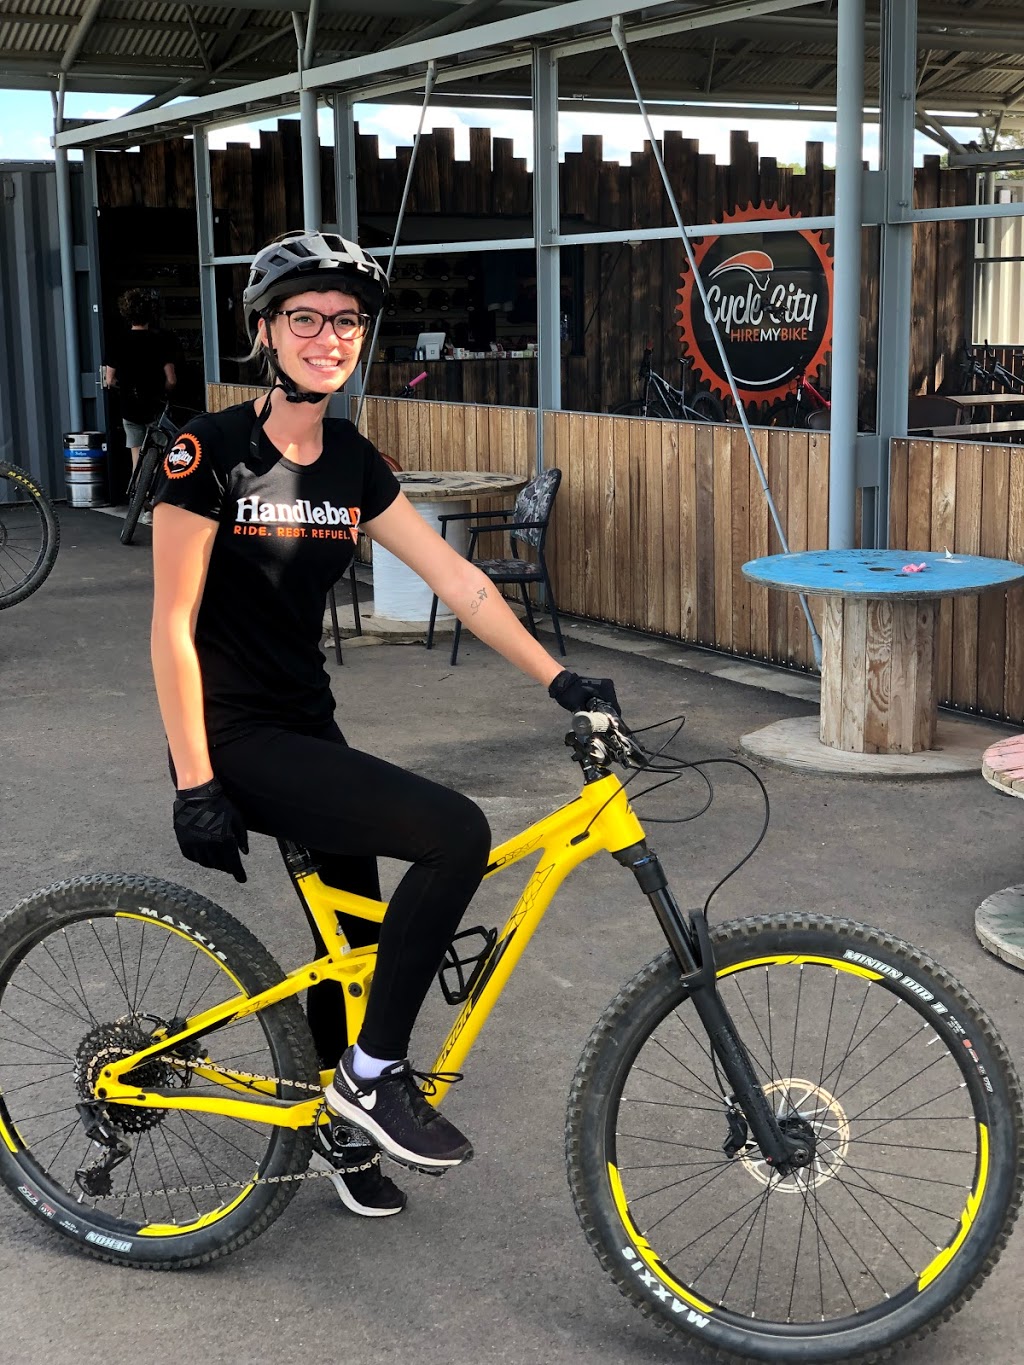 Cycle City Hire My Bike |  | Dave McInnes Rd, Stromlo ACT 2611, Australia | 0262491806 OR +61 2 6249 1806